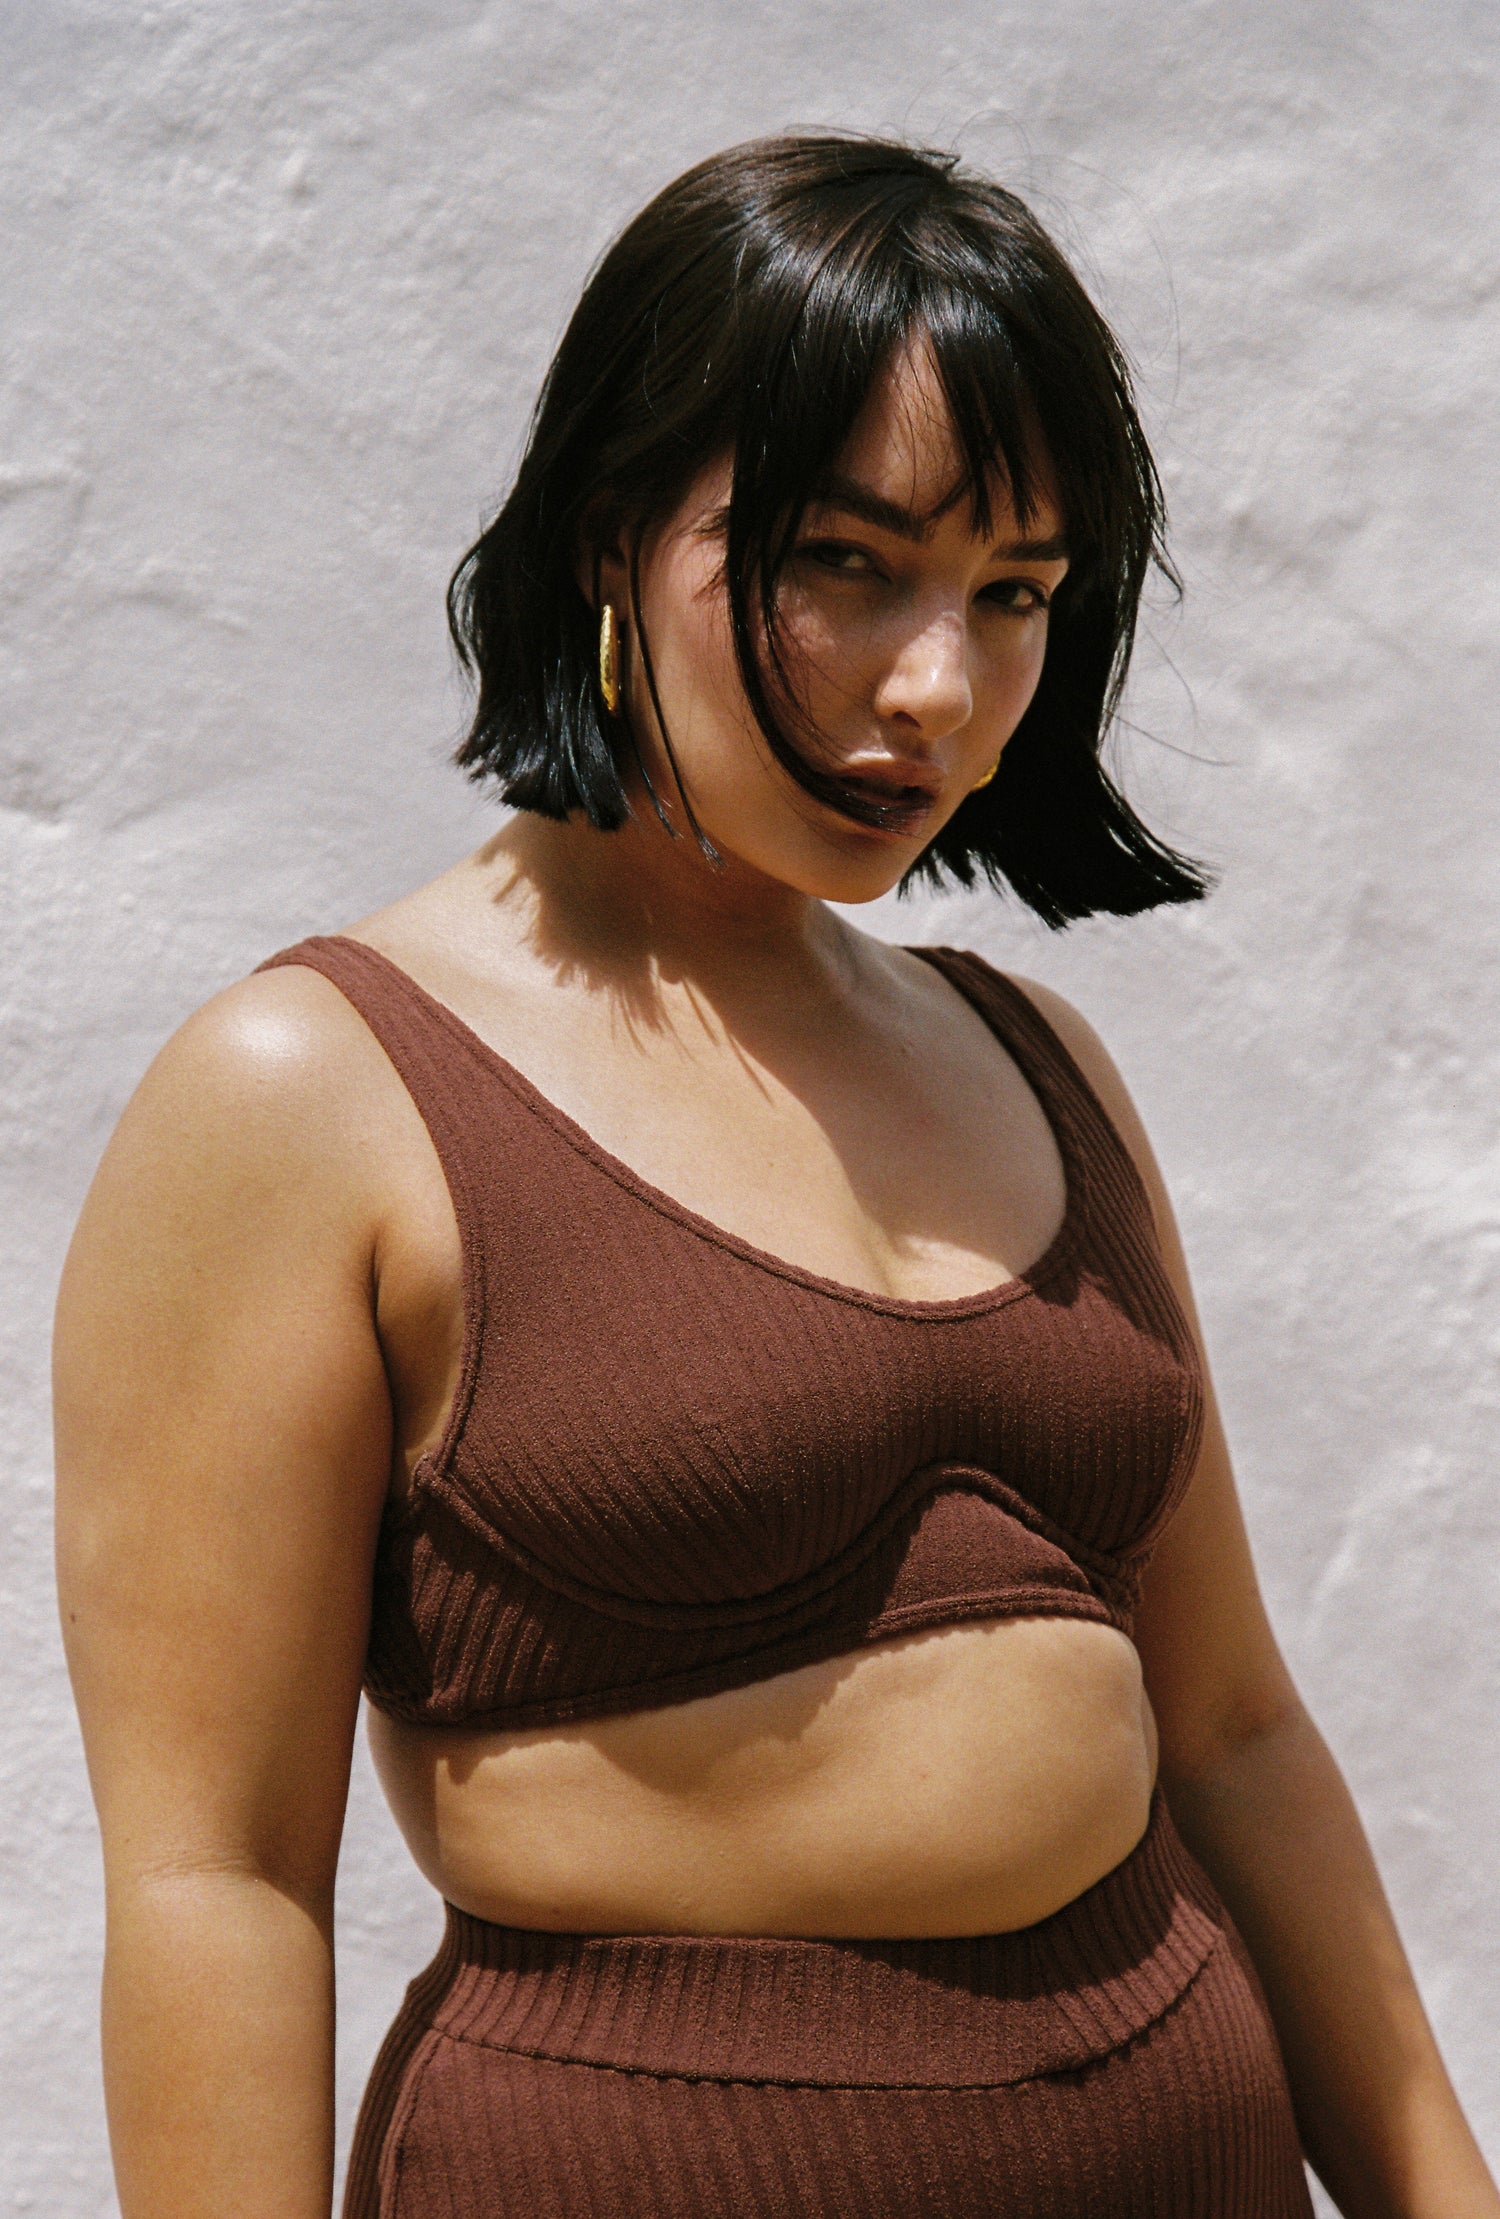 Ribbed Towelling Support Bra | Cocoa